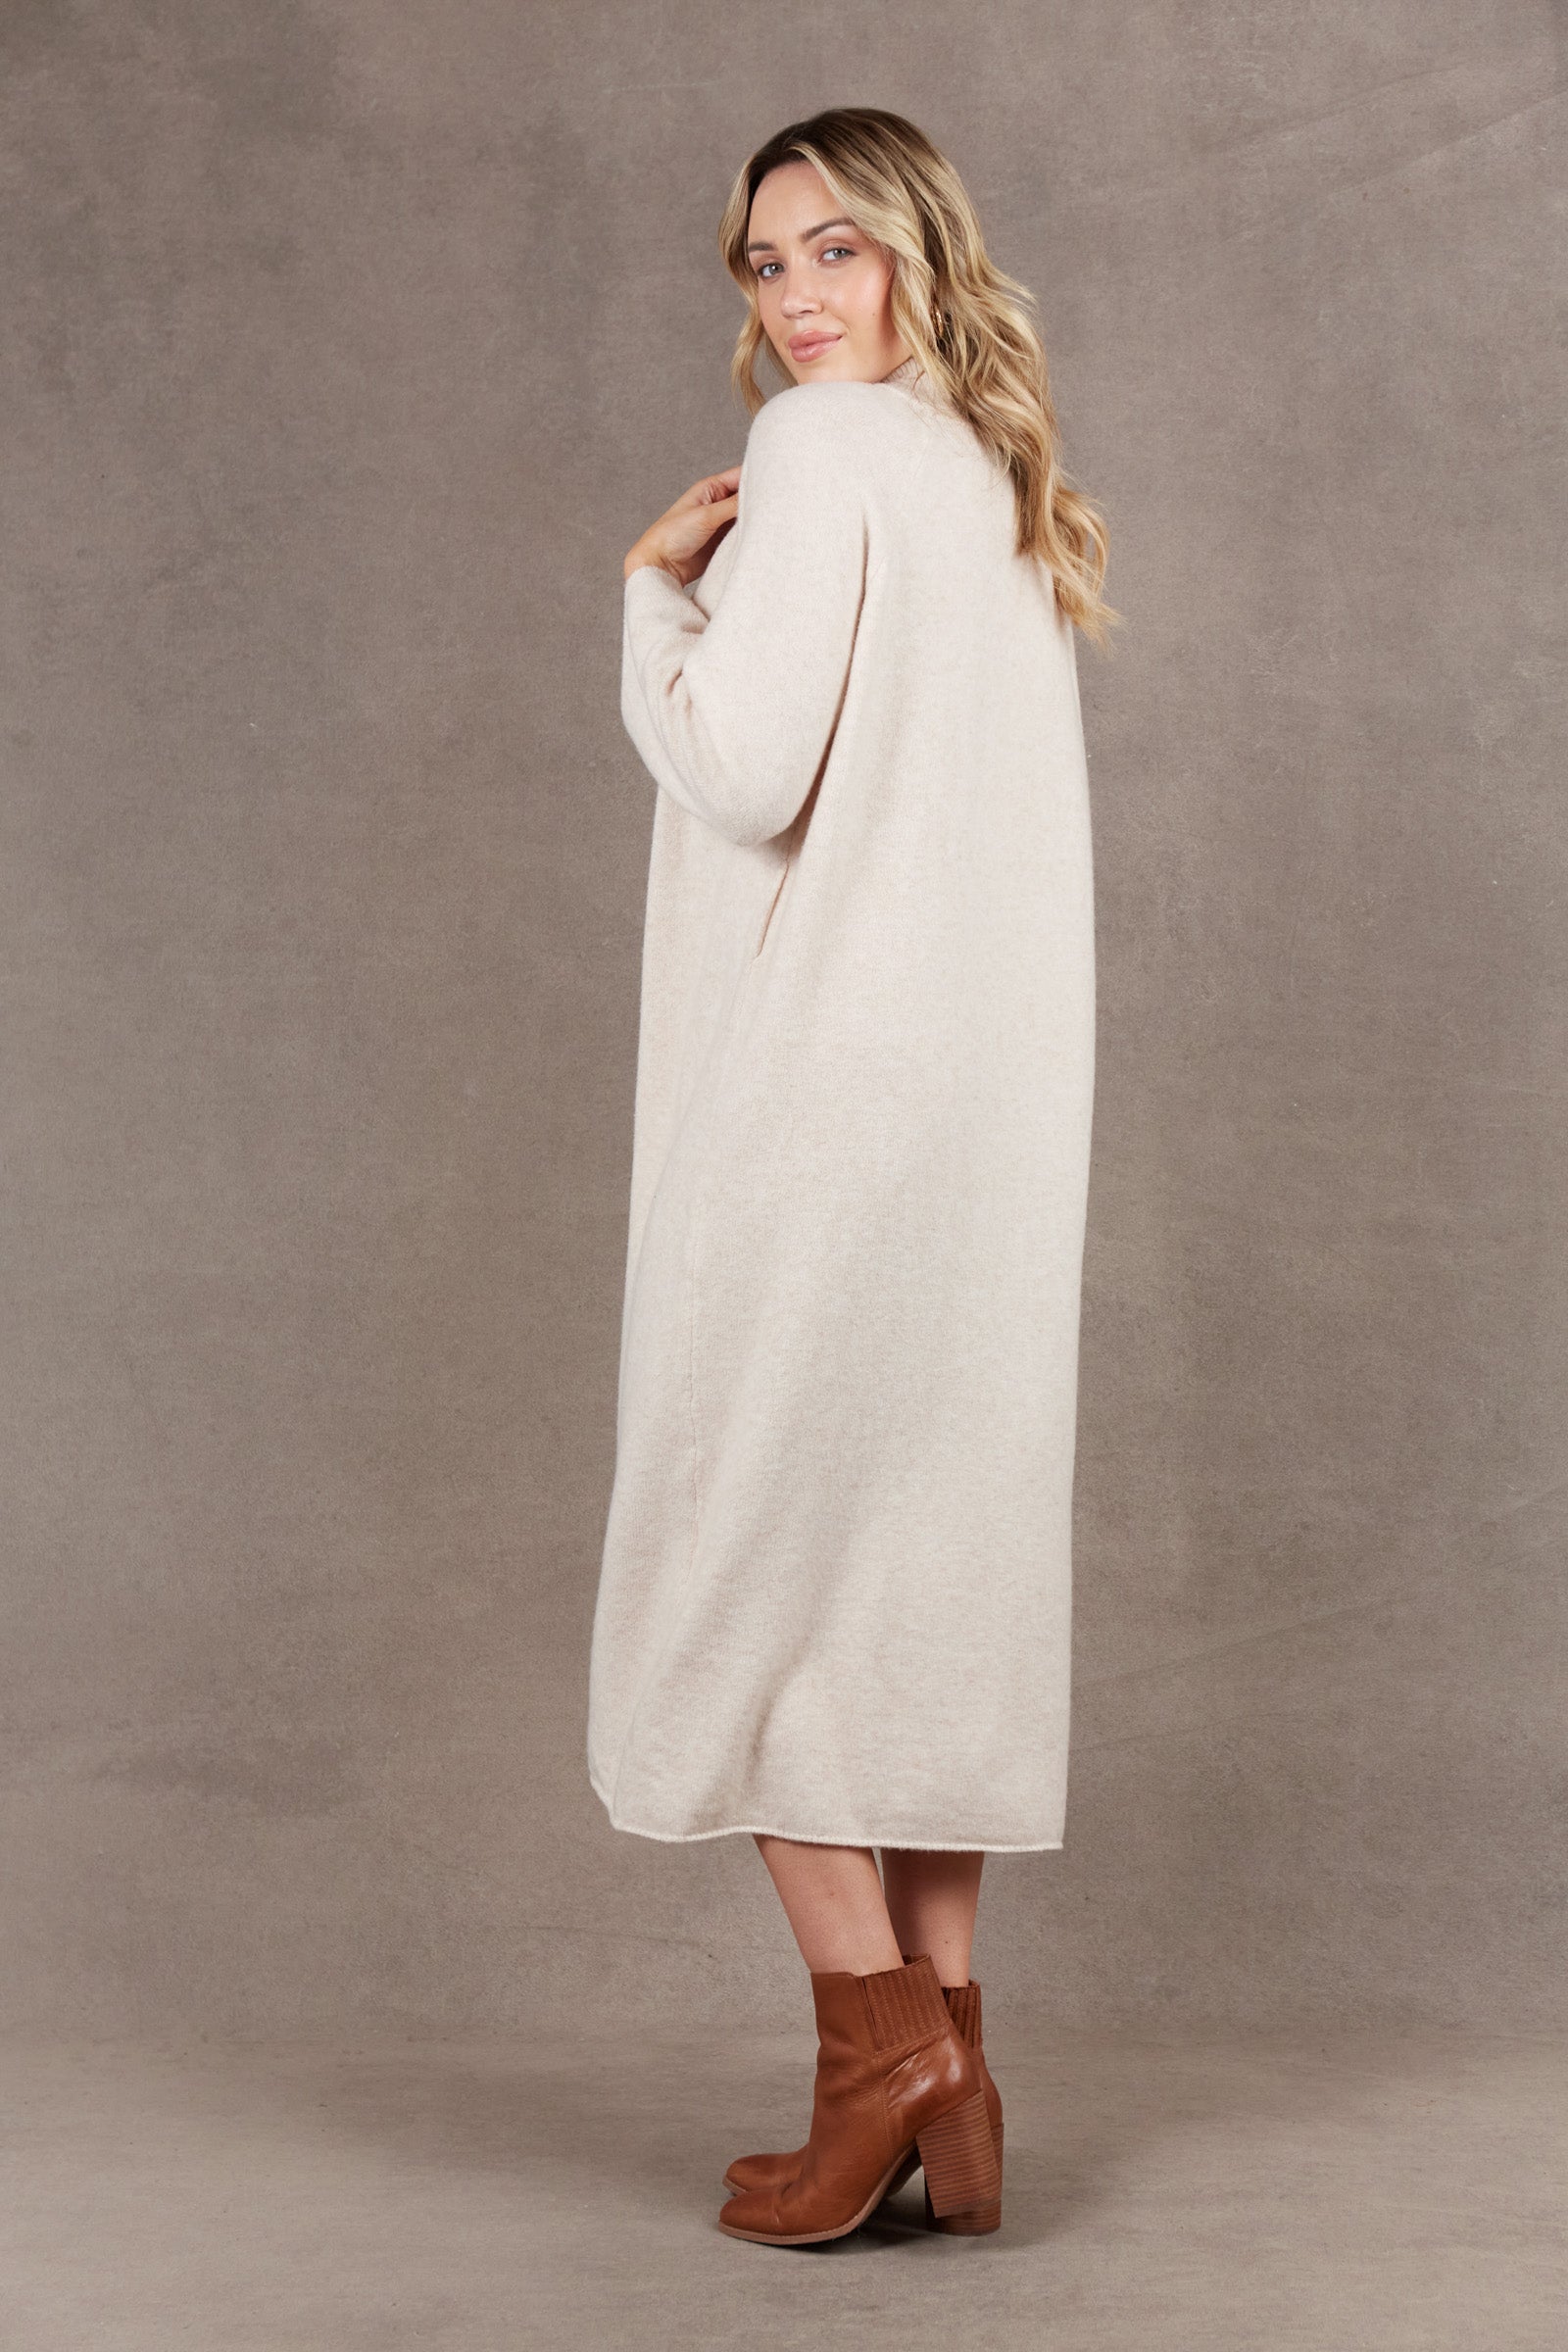 Paarl Tie Knit Dress - Oat - eb&ive Clothing - Knit Dress One Size